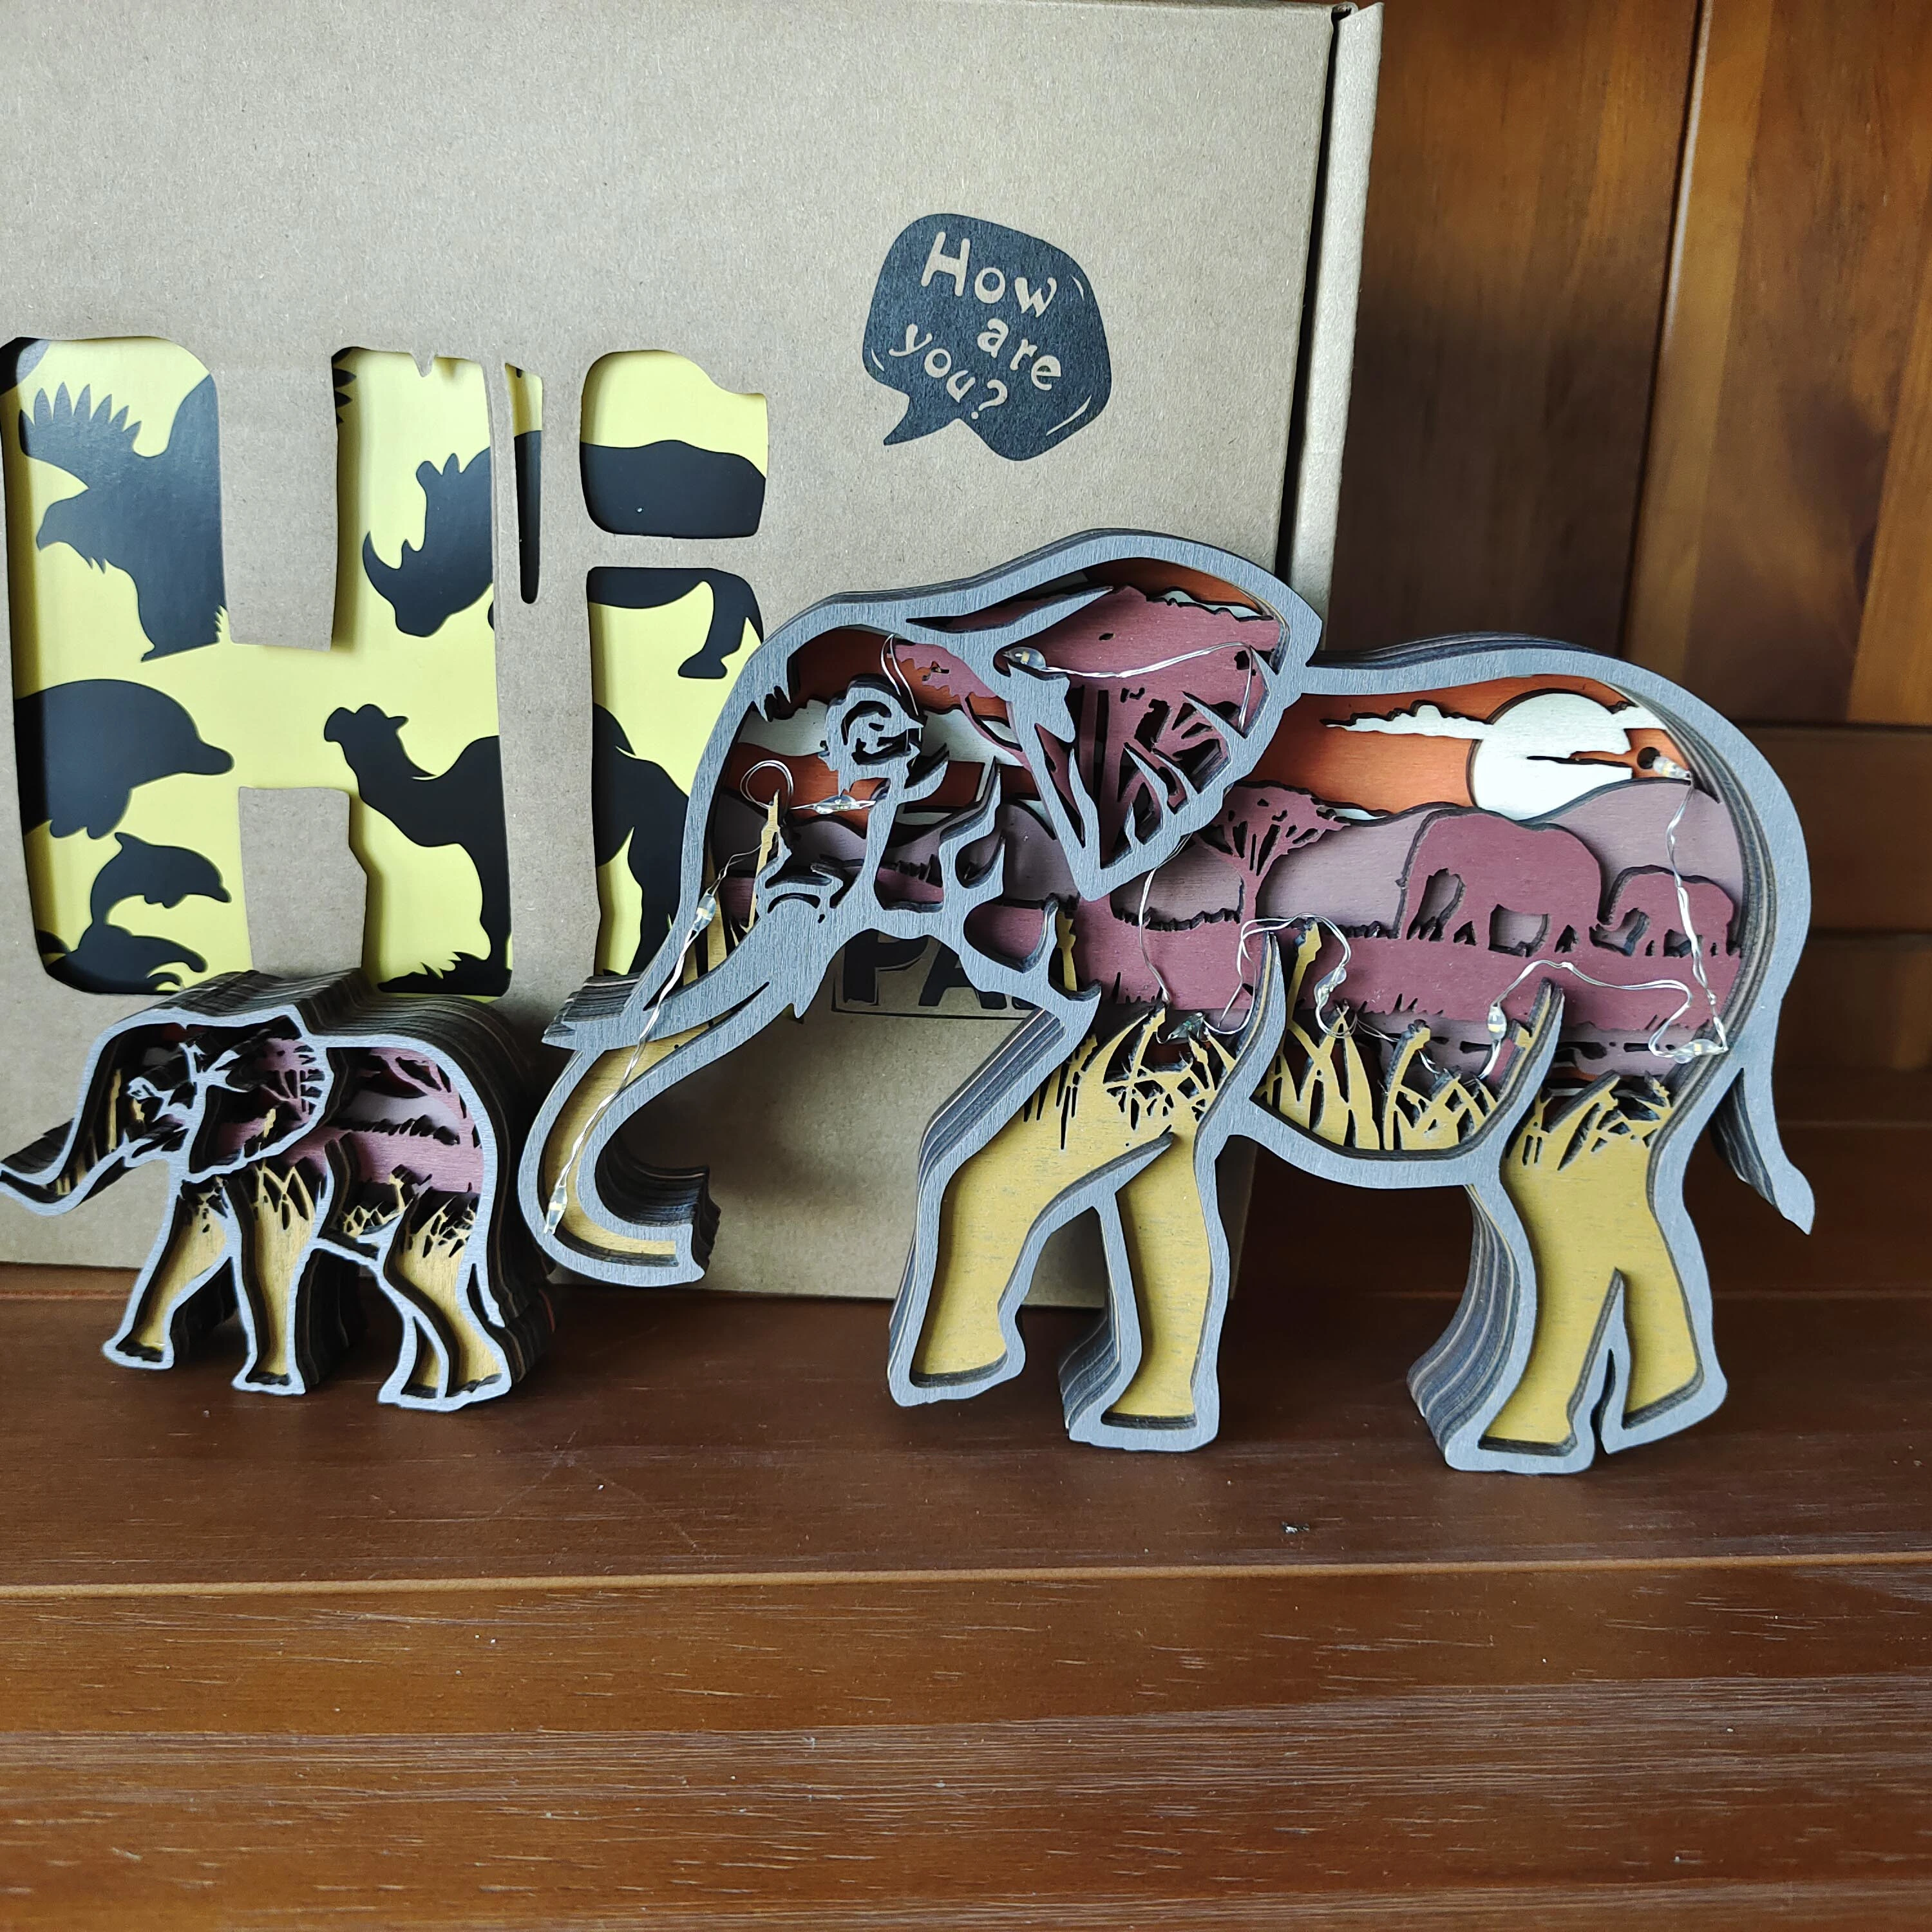 Elephant Wooden Animal Statues Night Light, For Home Desktop & Room Wall Decor, Holiday Gift